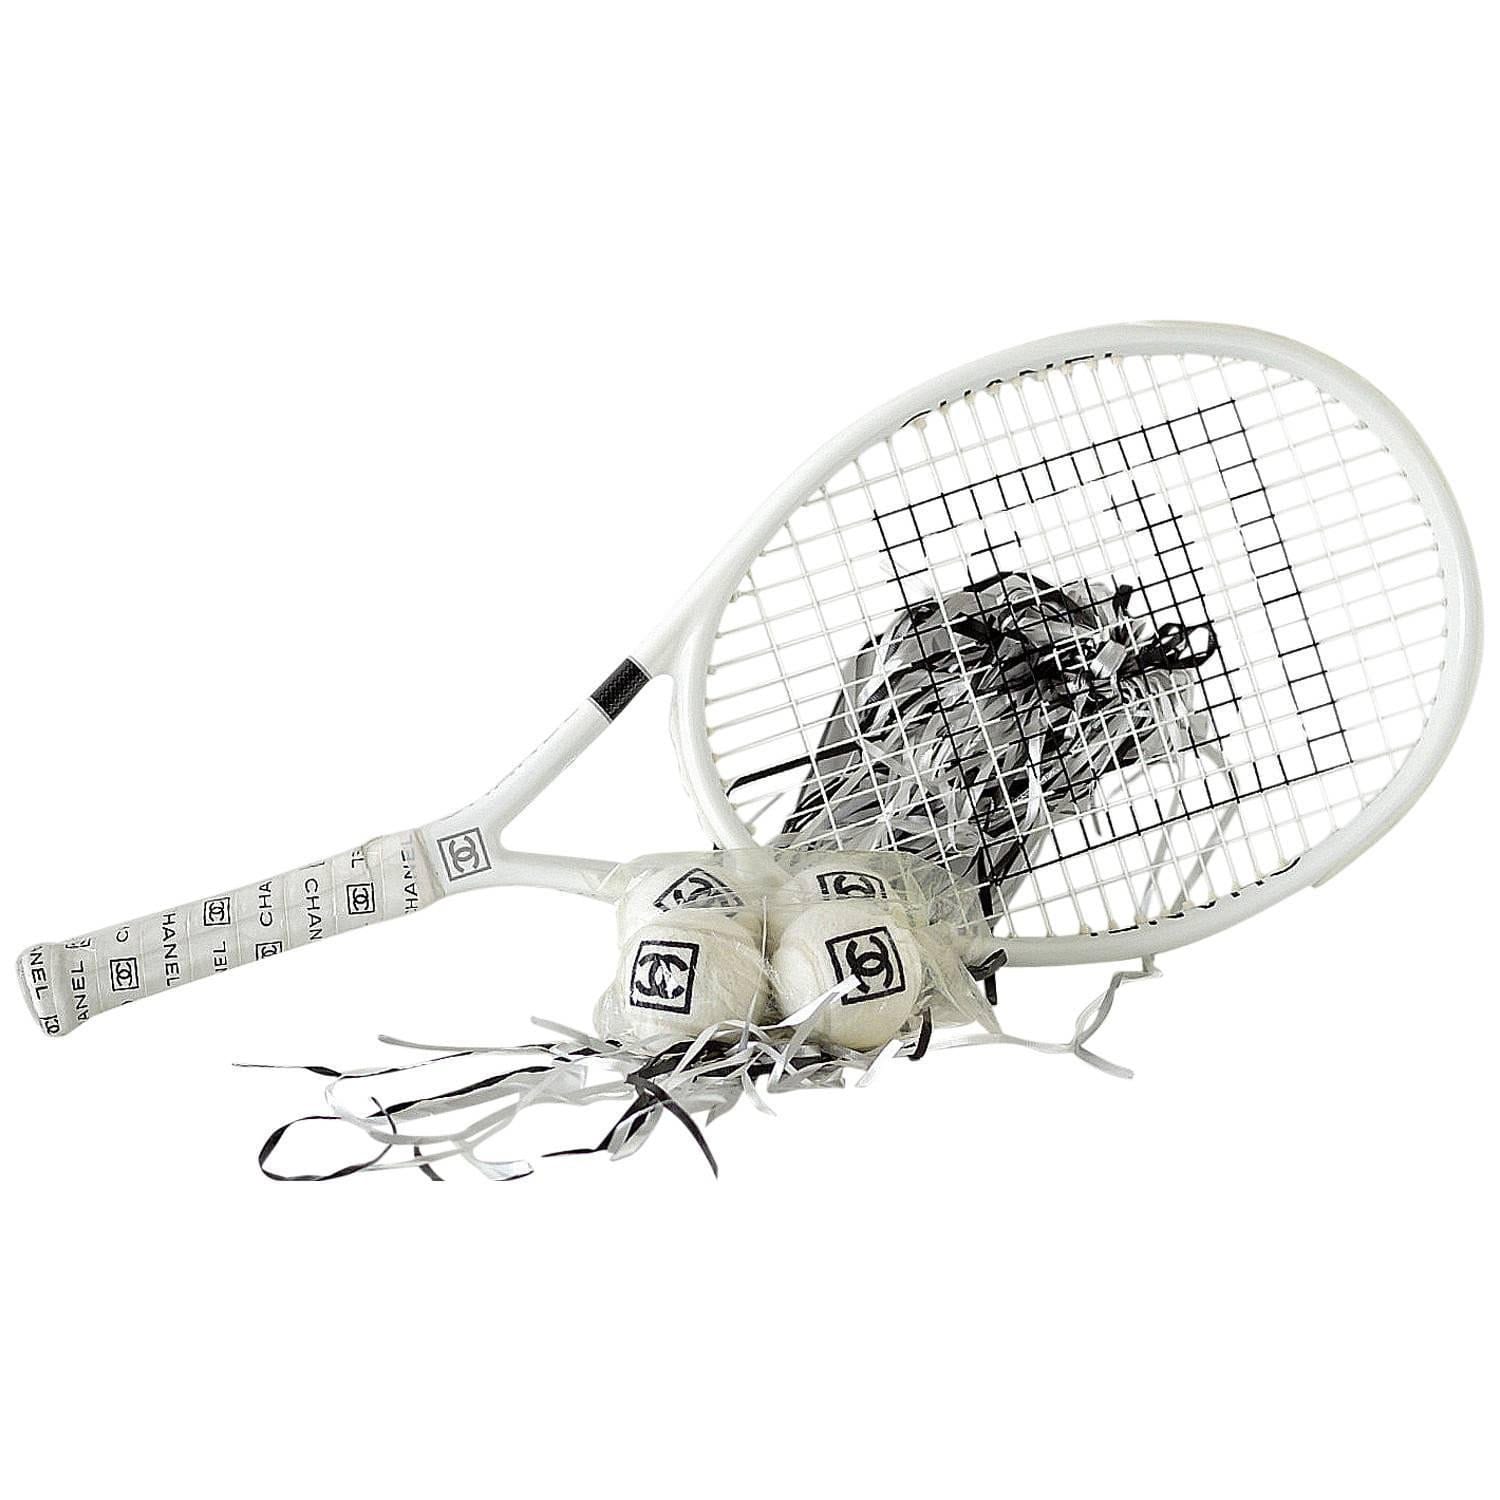 Chanel Limited Edition Tennis Racquet Racket 4 Tennis Balls and Case n –  Mightychic